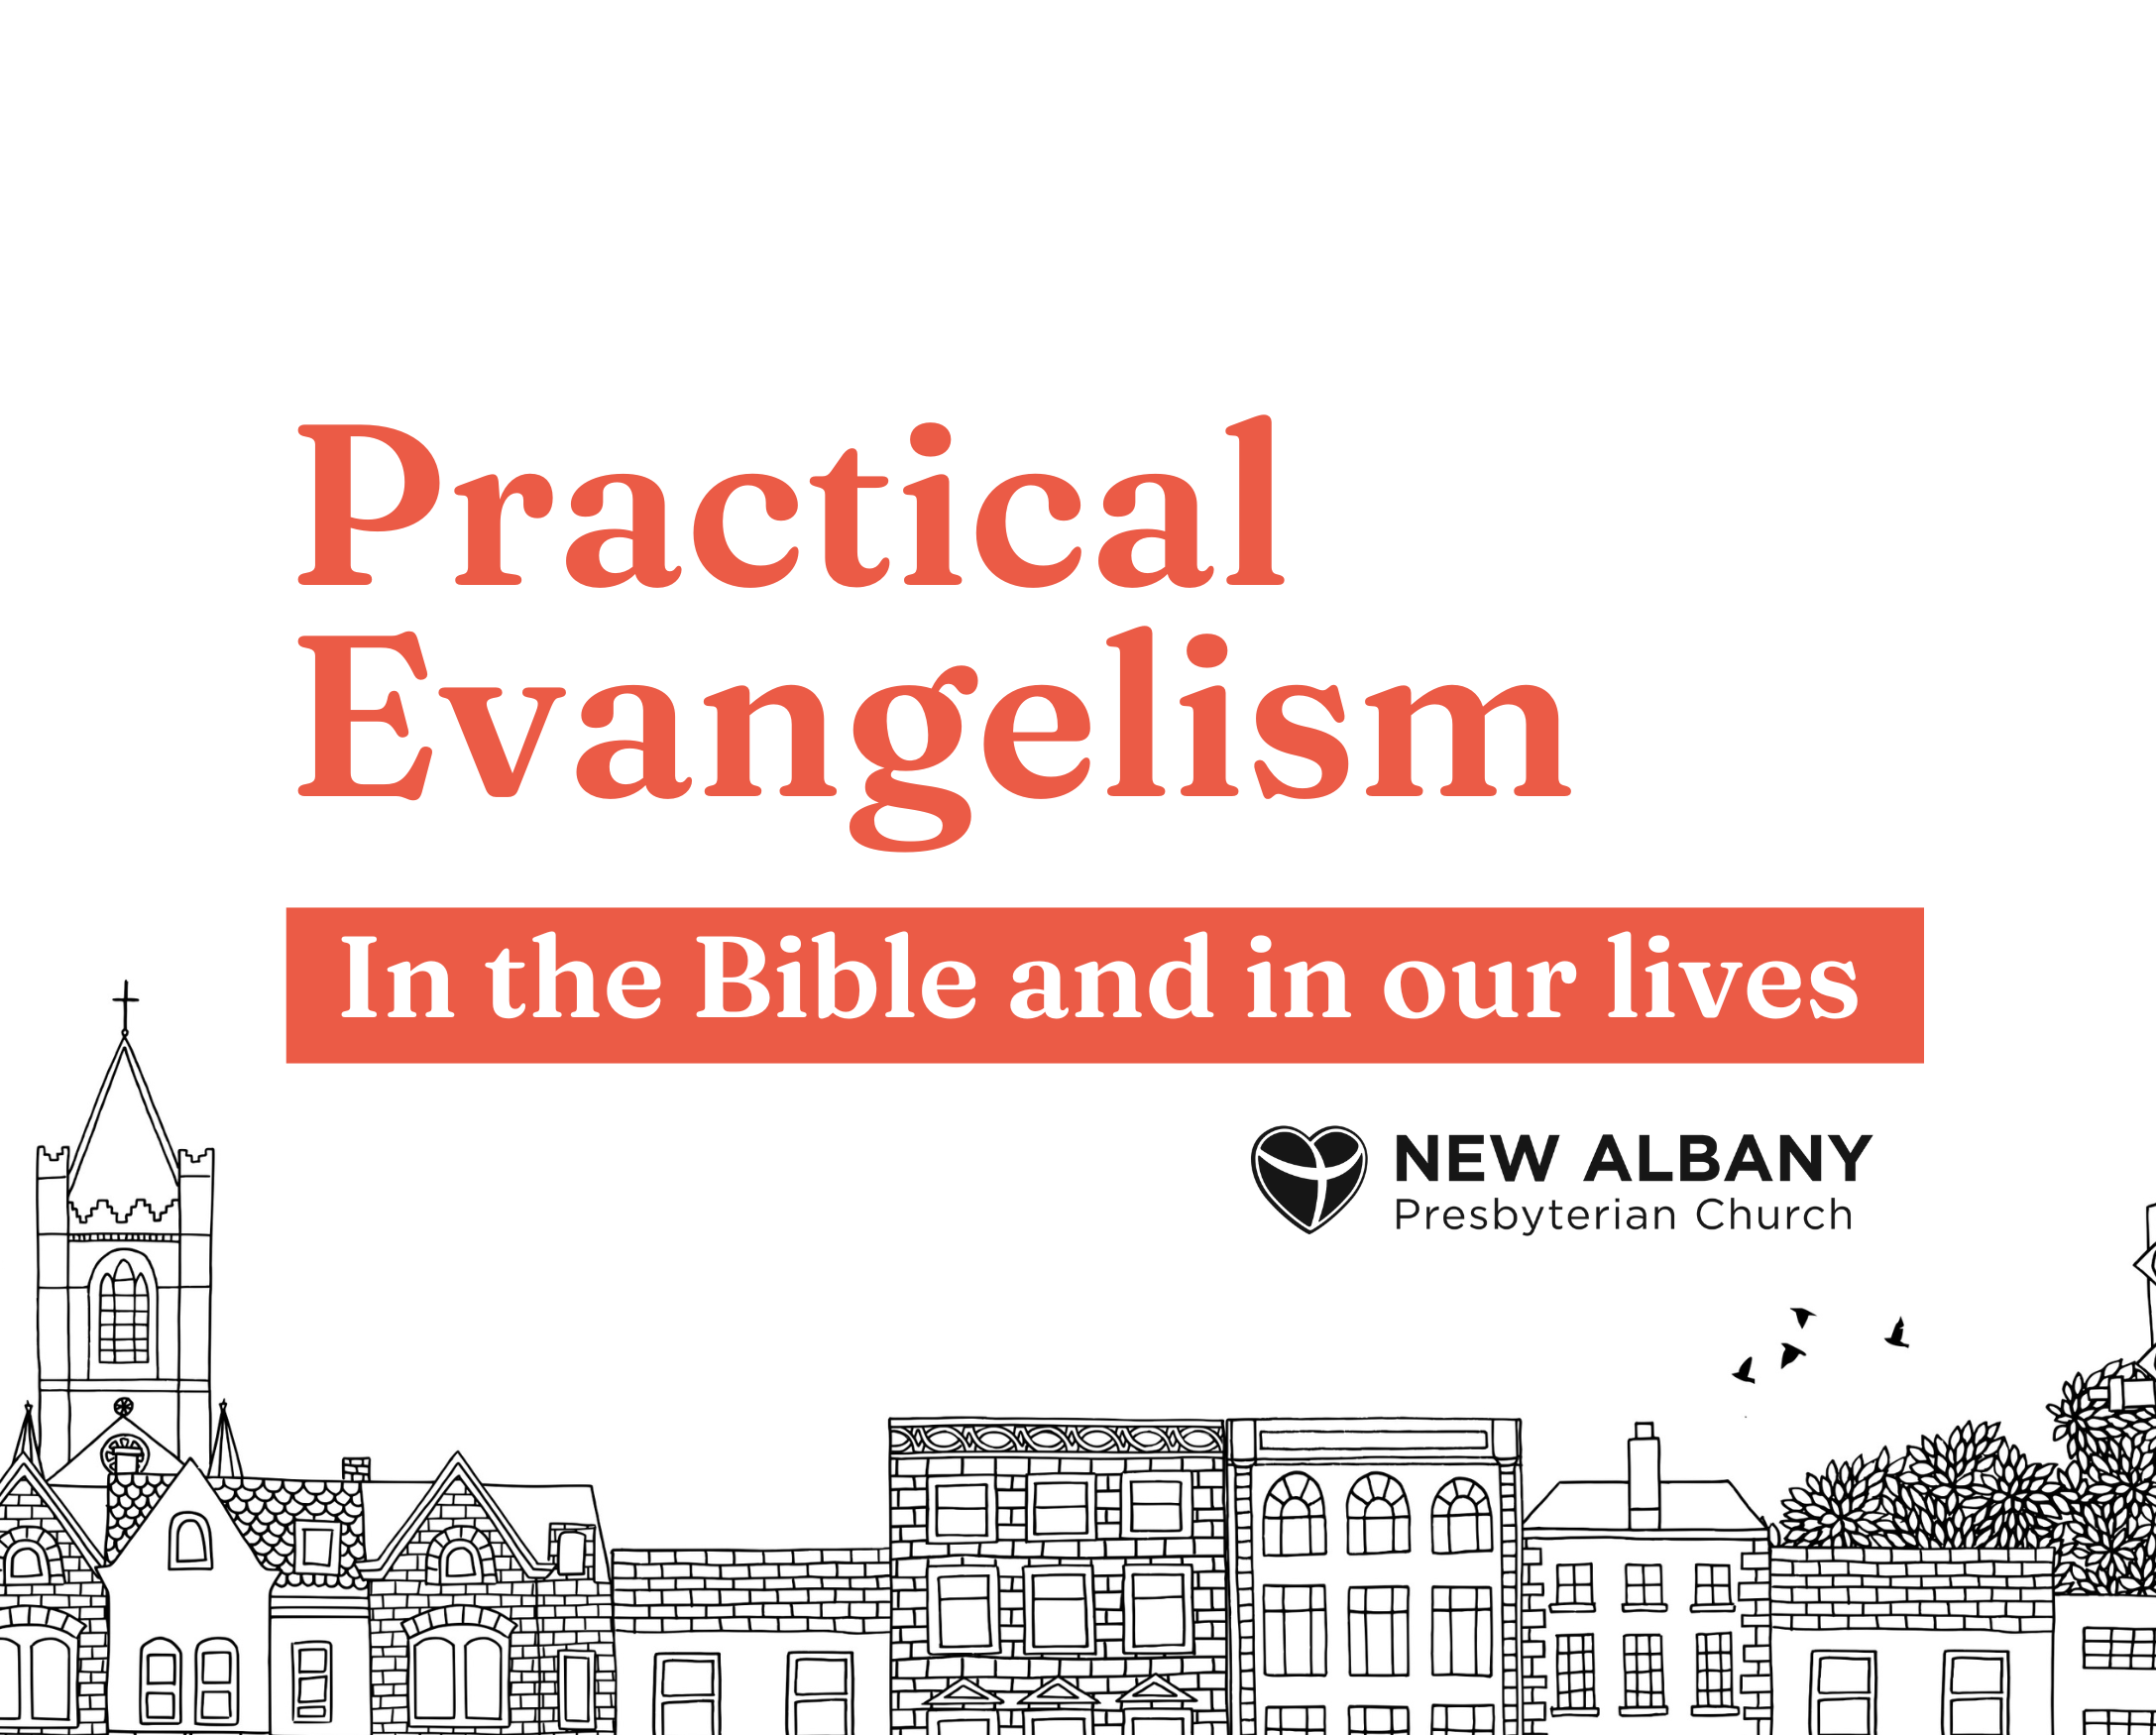 Practical Evangelism in the Bible and our lives: Sow broadly: The woman at the well